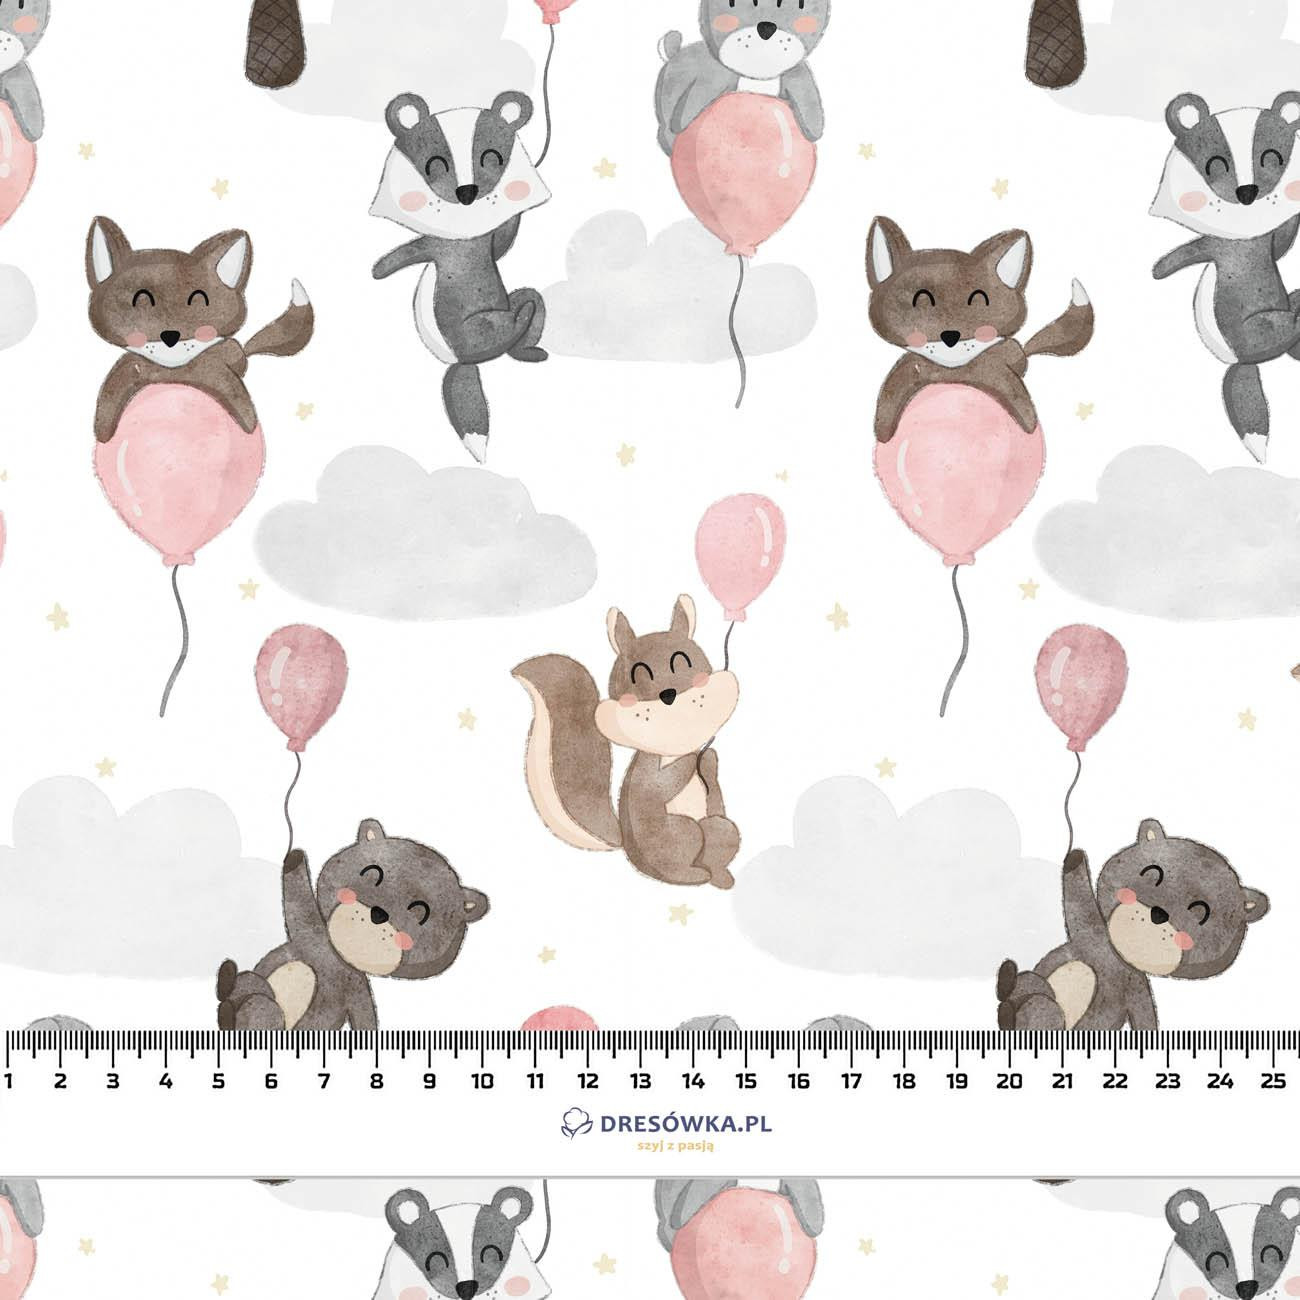 ANIMALS IN CLOUDS pat. 1 - Waterproof woven fabric